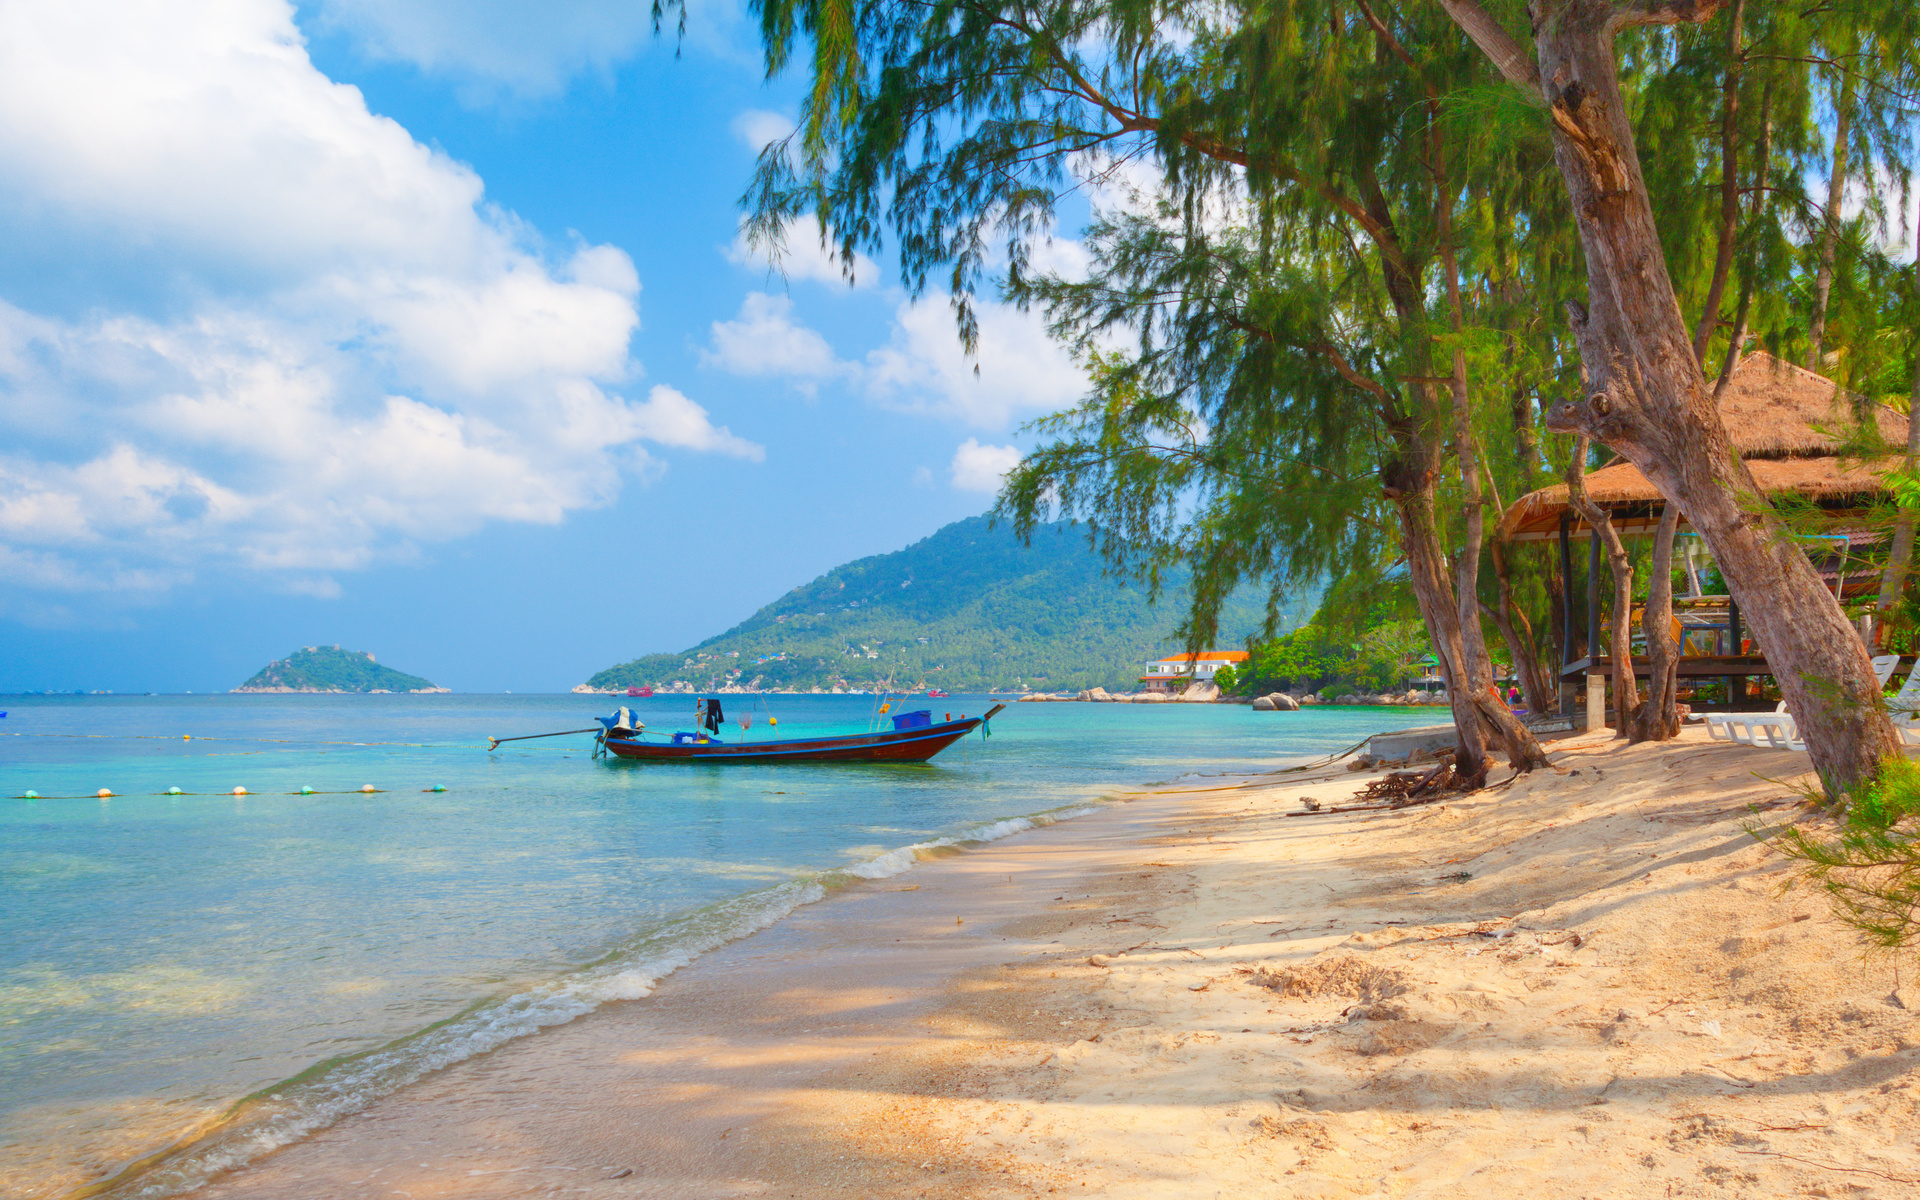 sand, sea, sky, clouds, trees, landscape, nature, boats, thailand